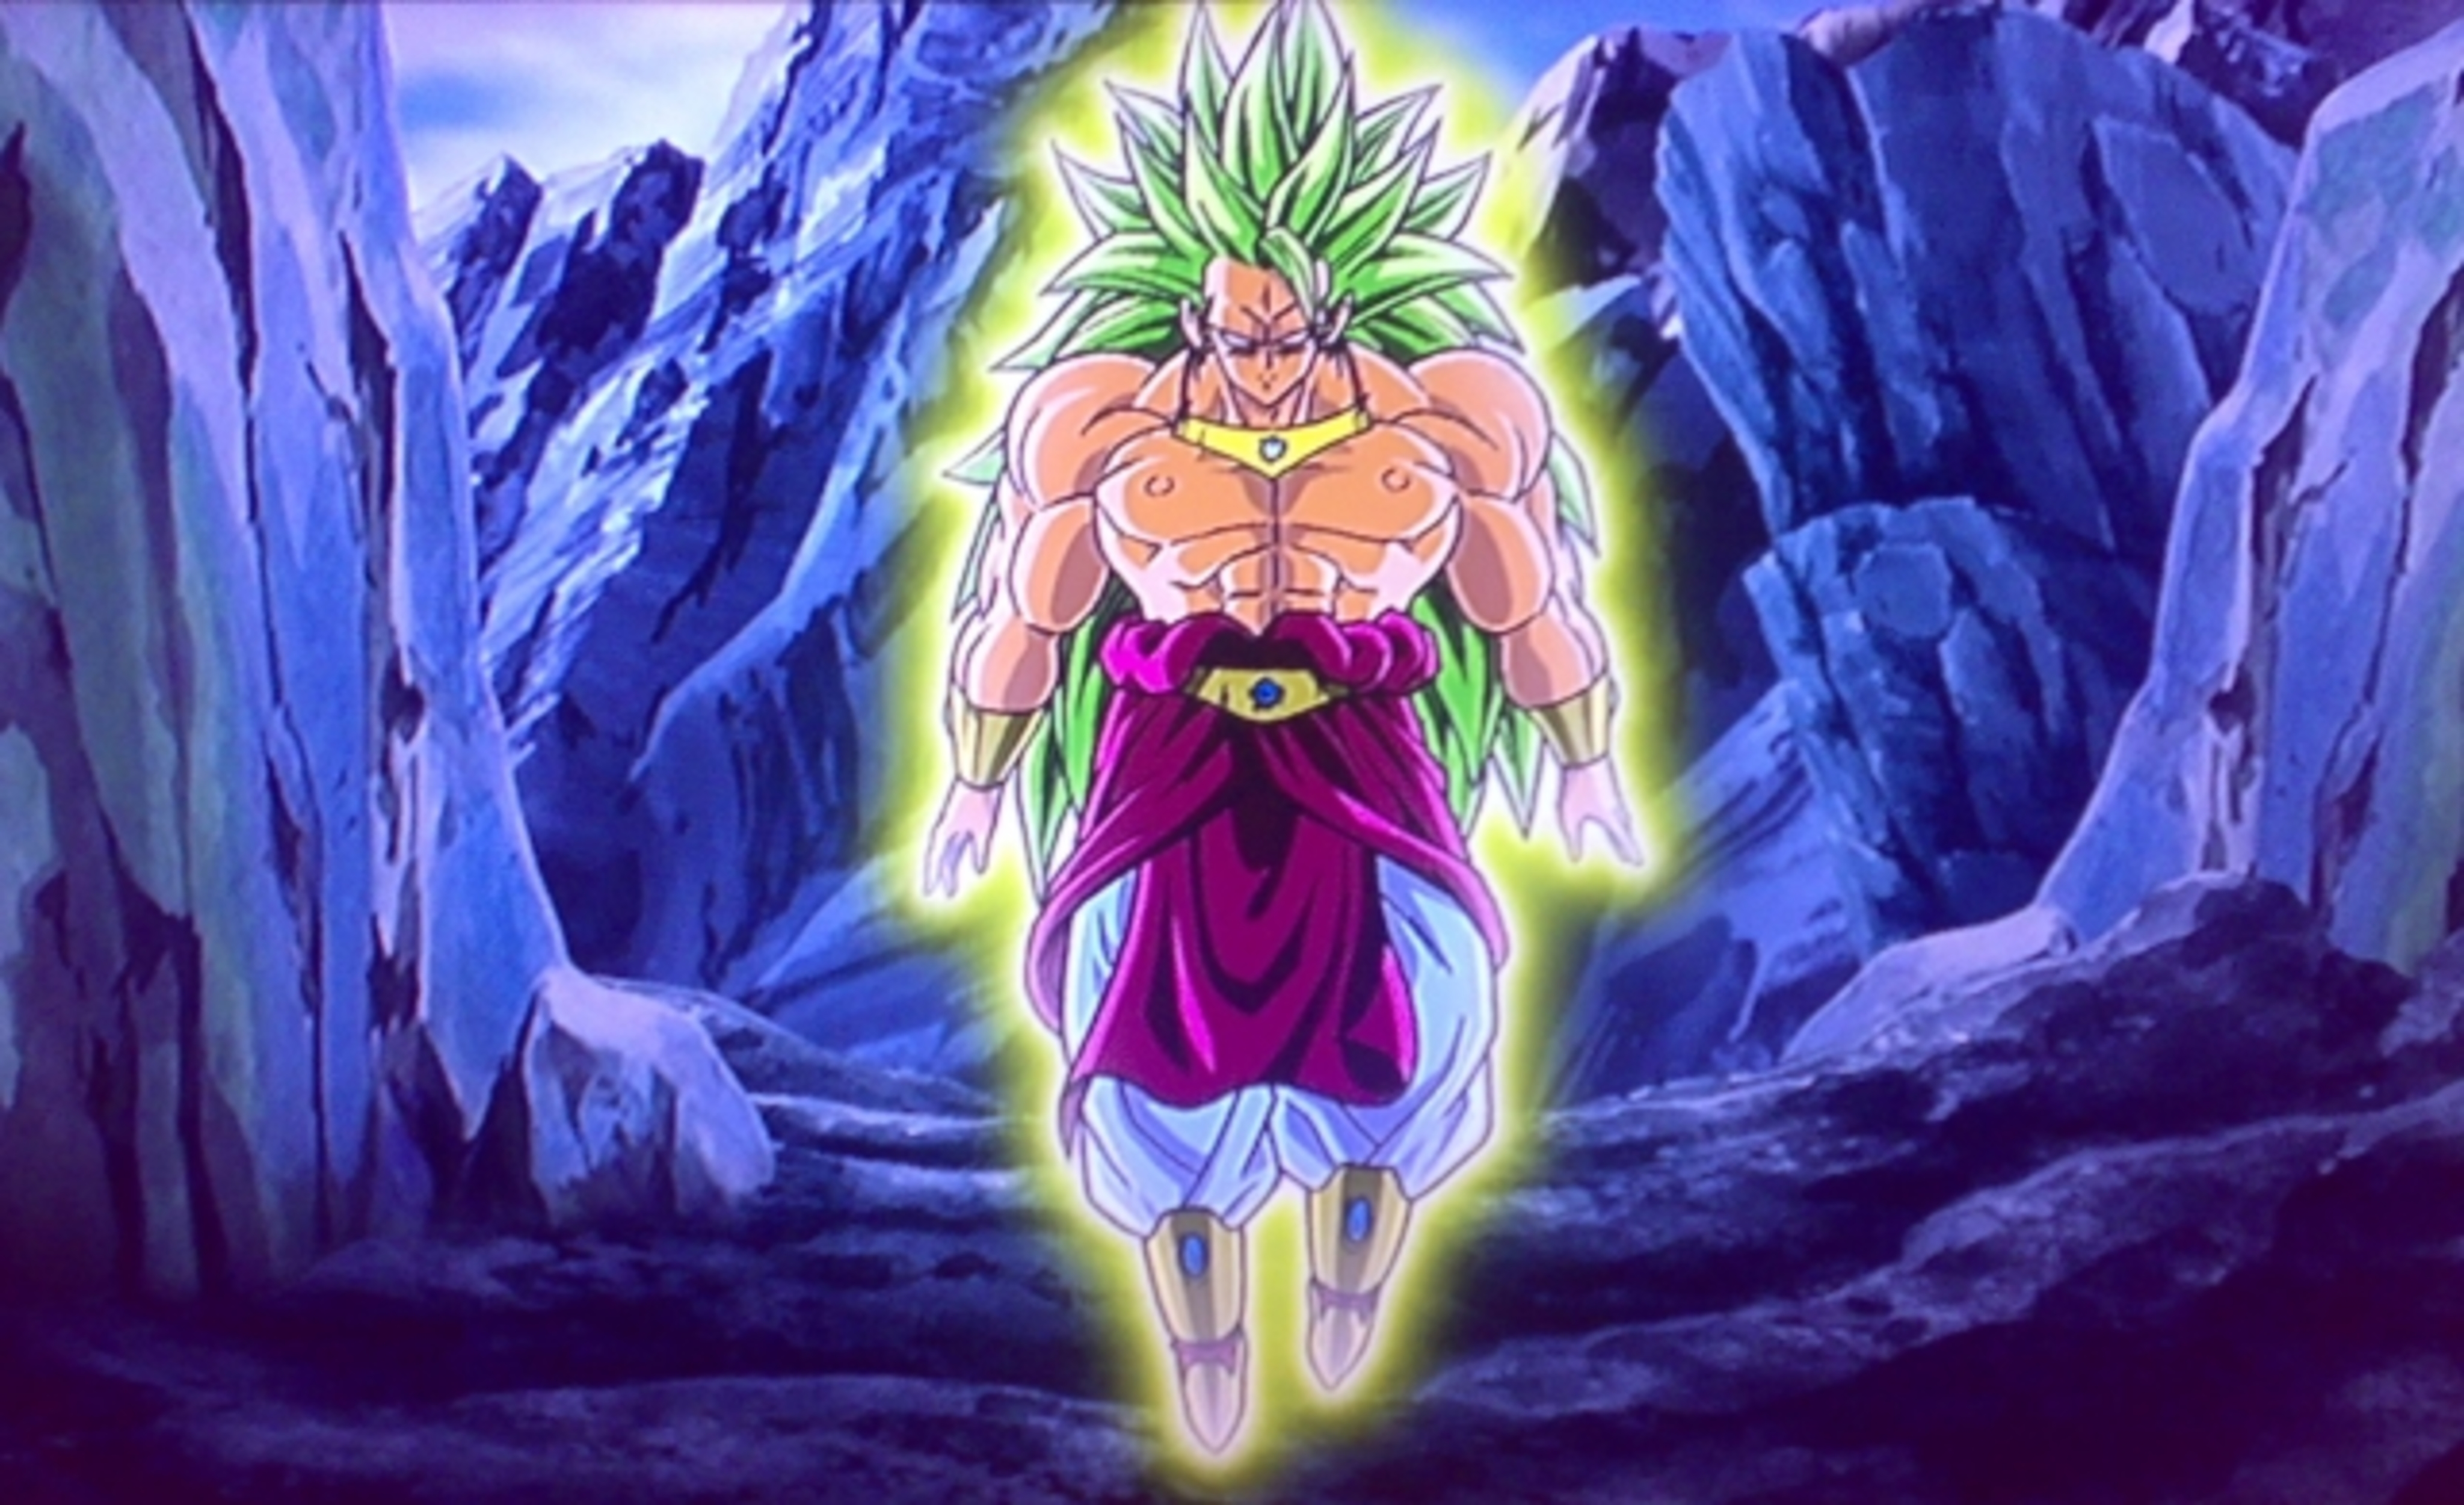 You also had obvious takeaways of Broly and several other DBZ characters di...